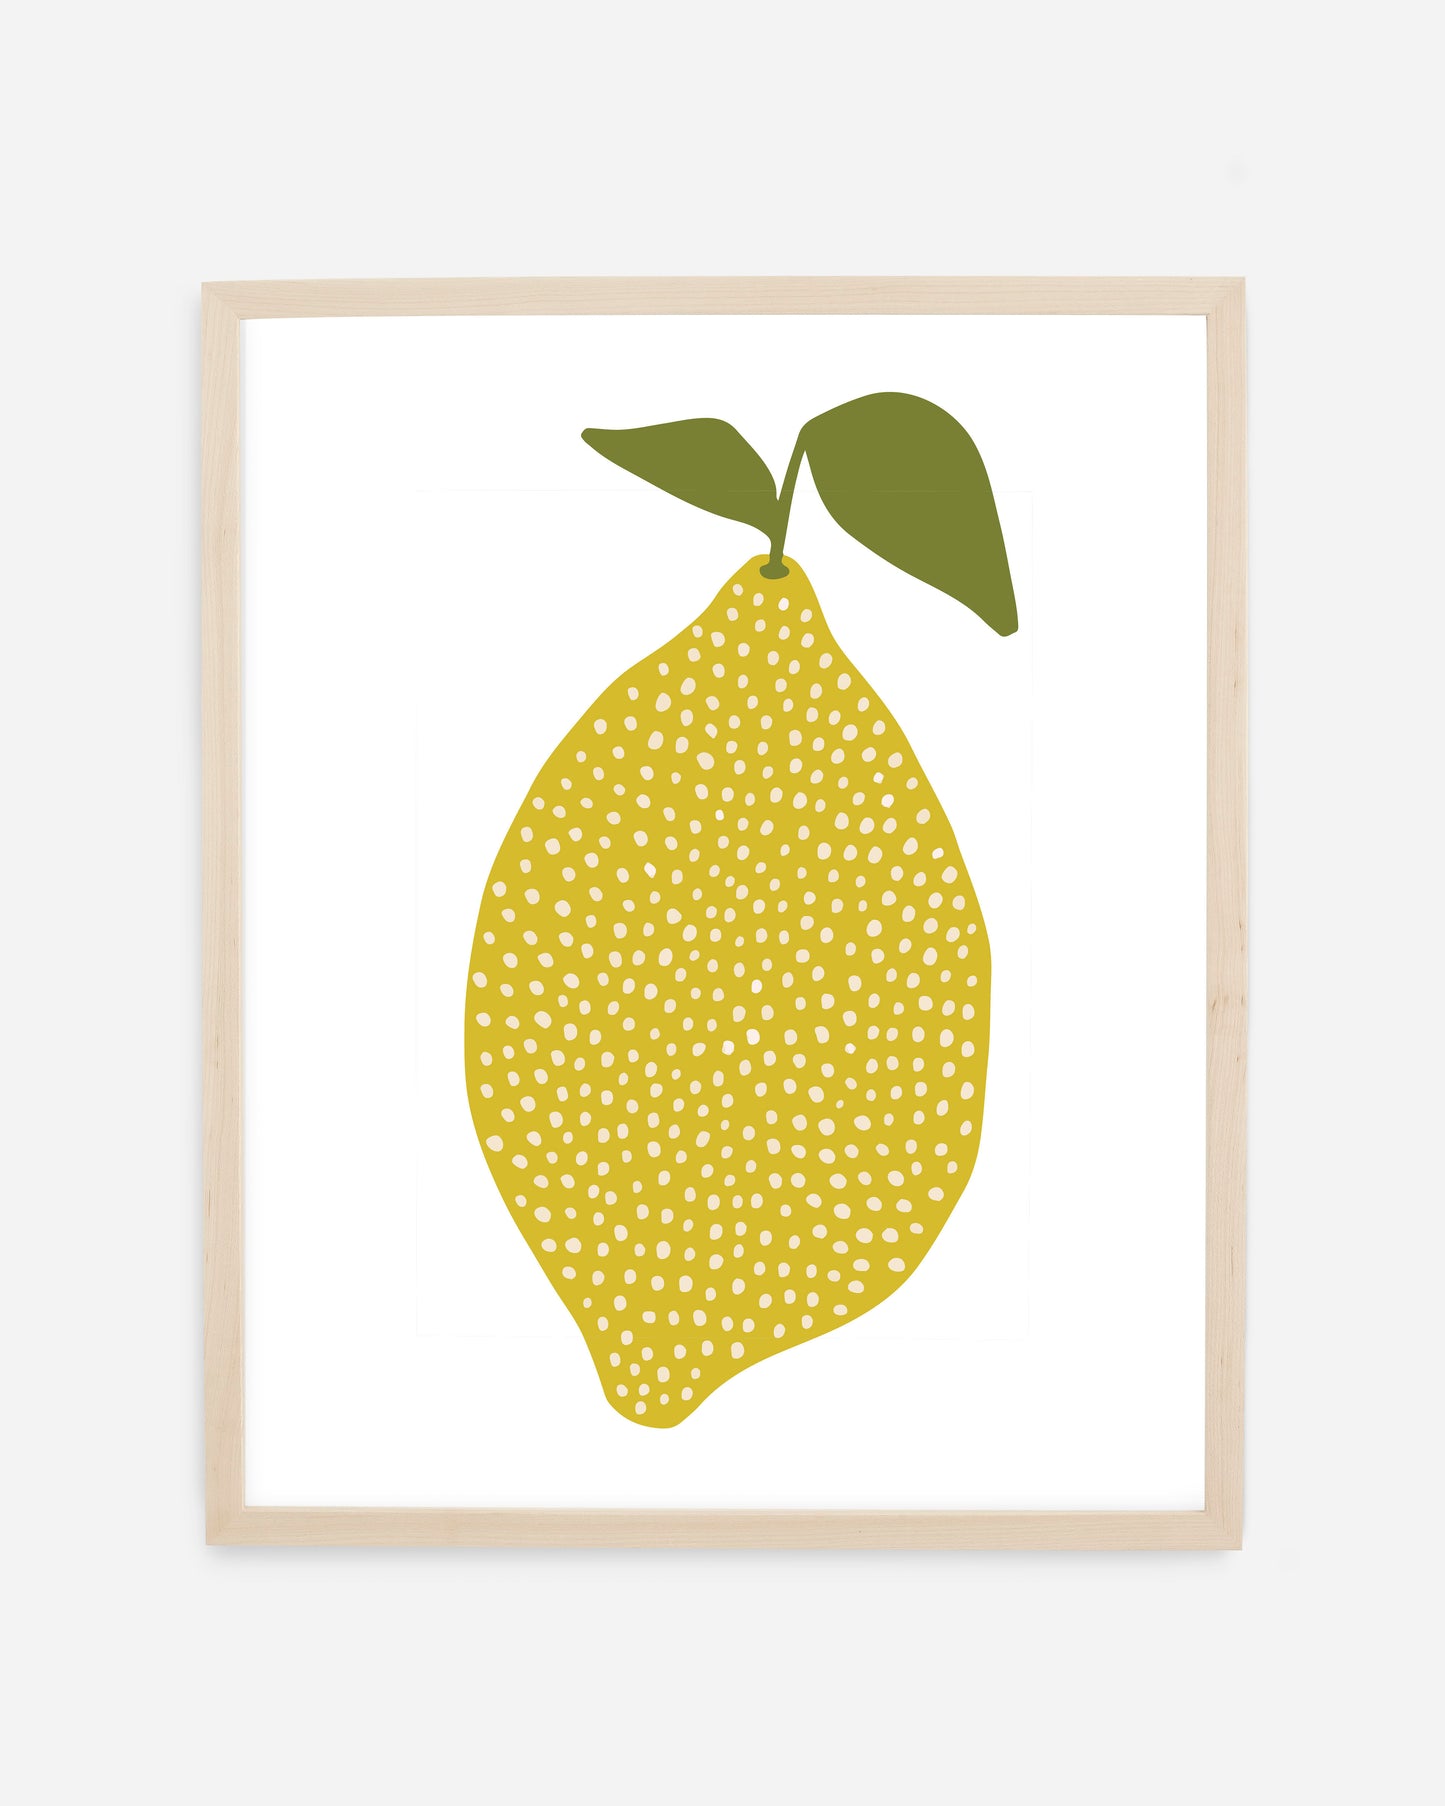 Lemon Fine Art Print by Freckled Fuchsia. Printed in the USA on 100% cotton, warm white, archival paper 